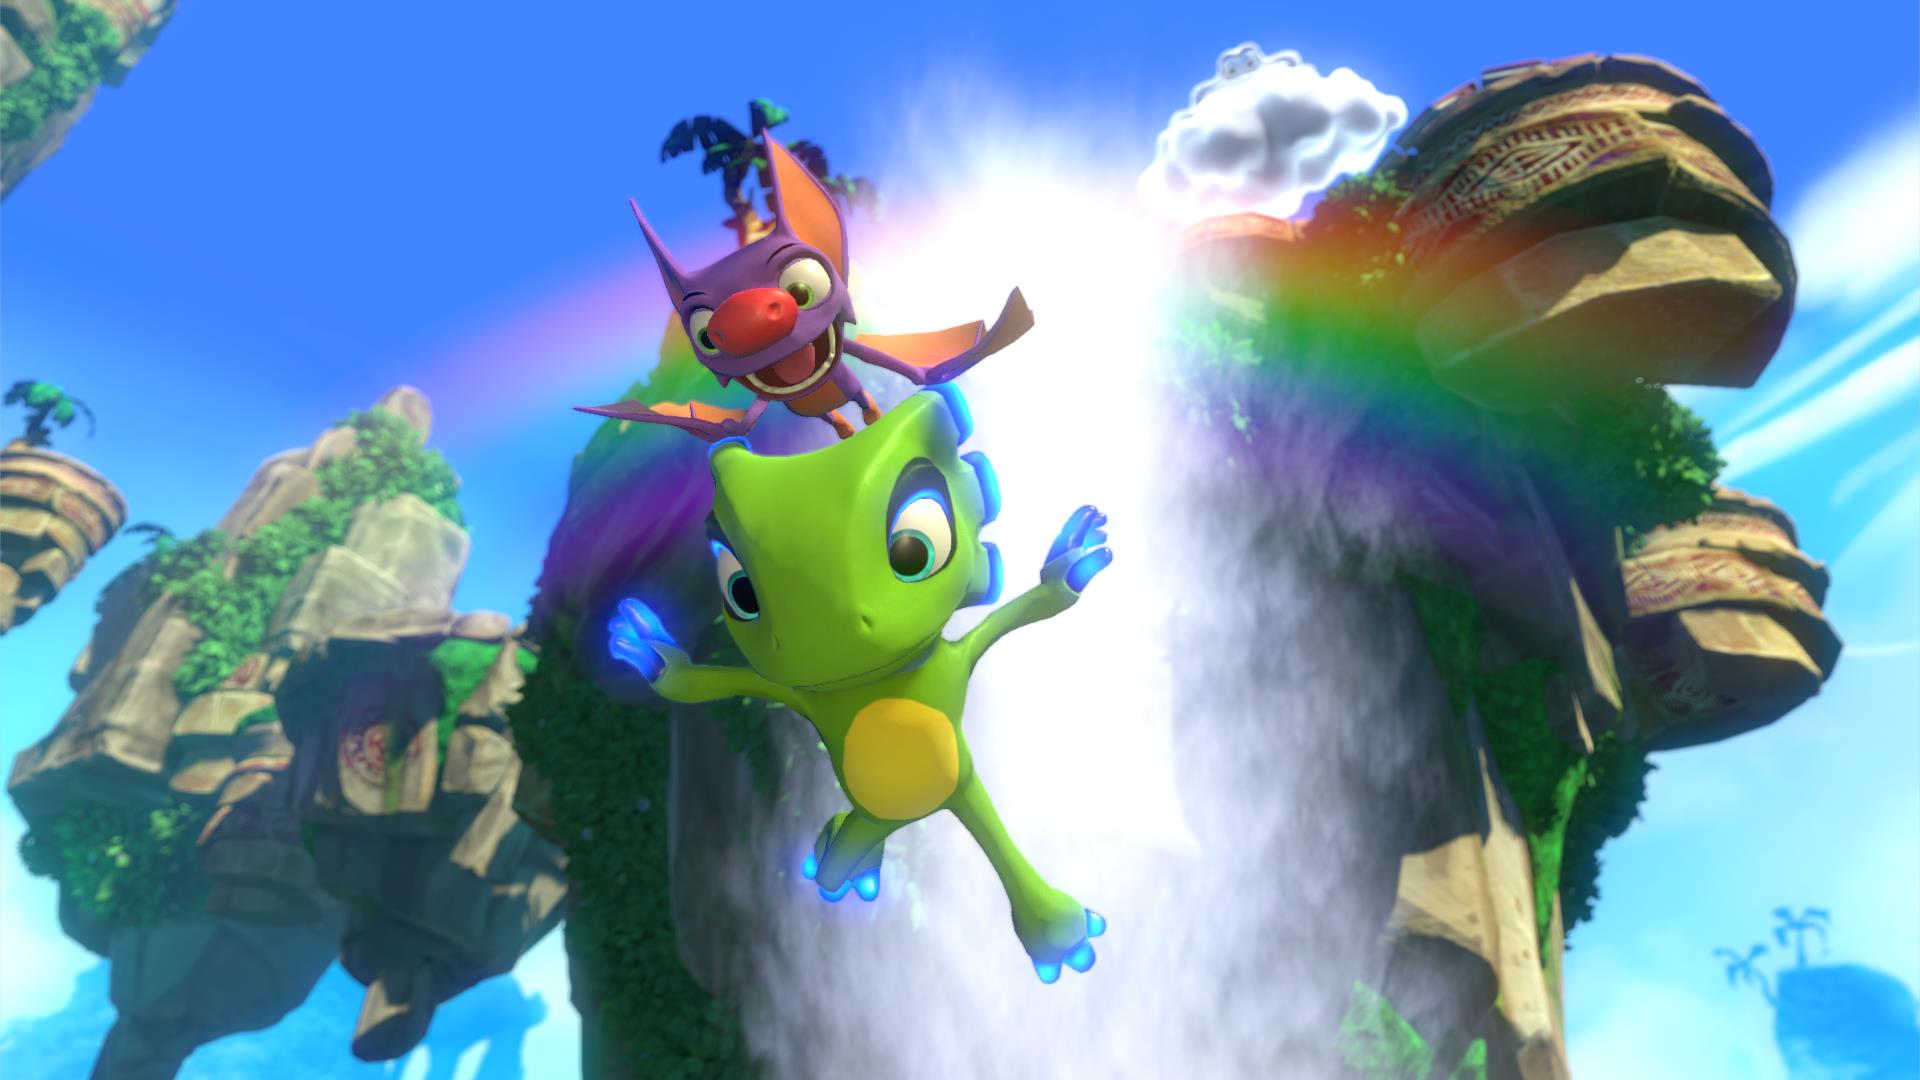 Image for New Yooka-Laylee trailer demonstrates the game's creative, changing level states